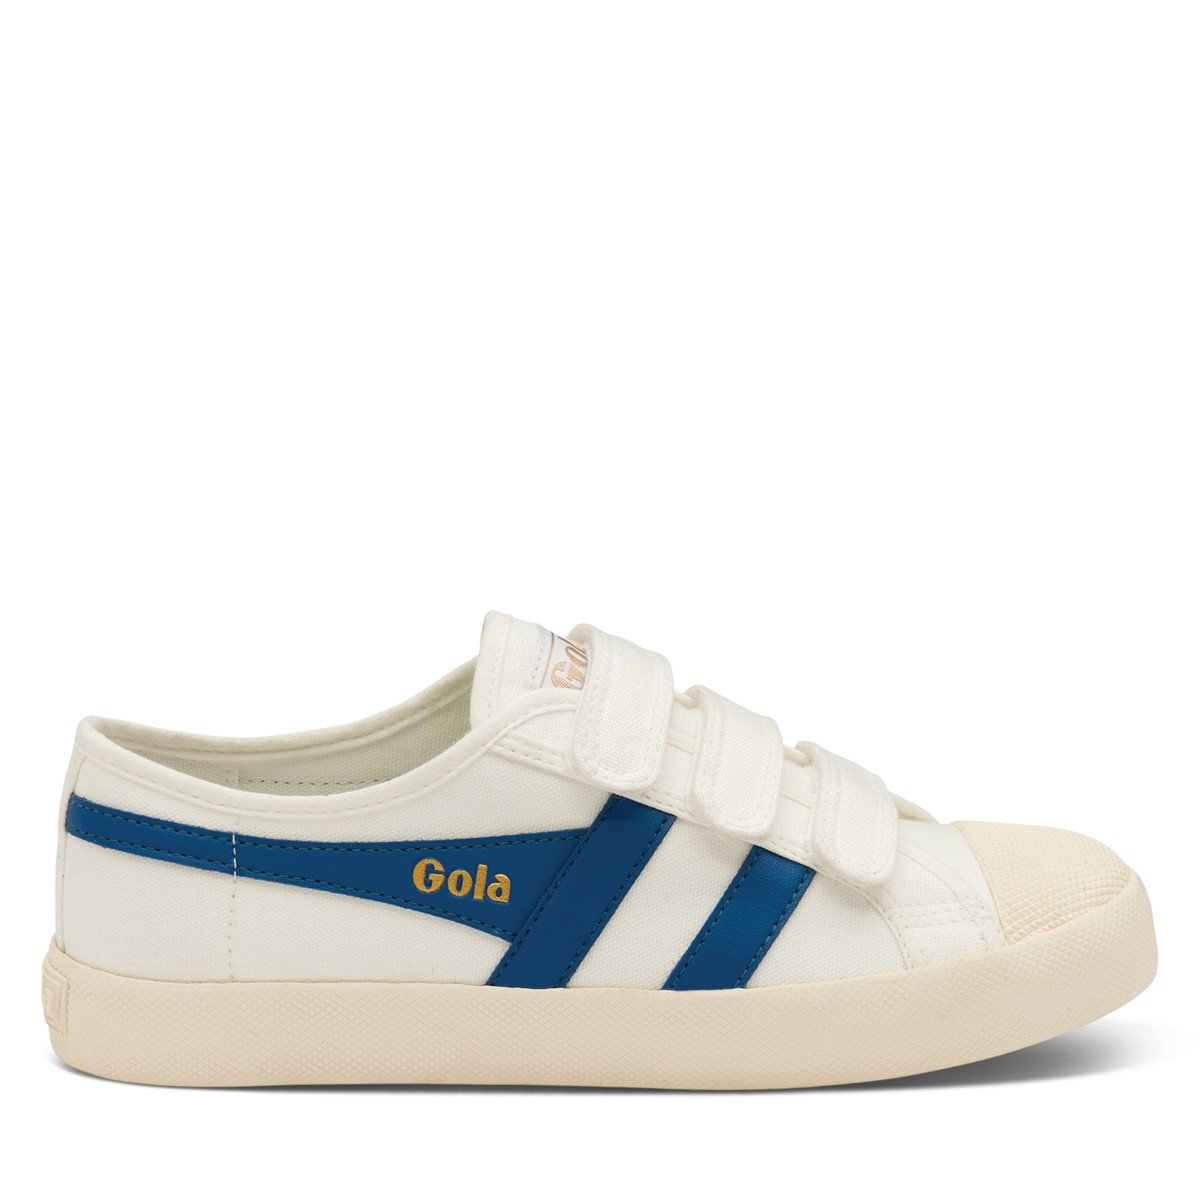 Women's Coaster Velcro Sneakers in White and Blue